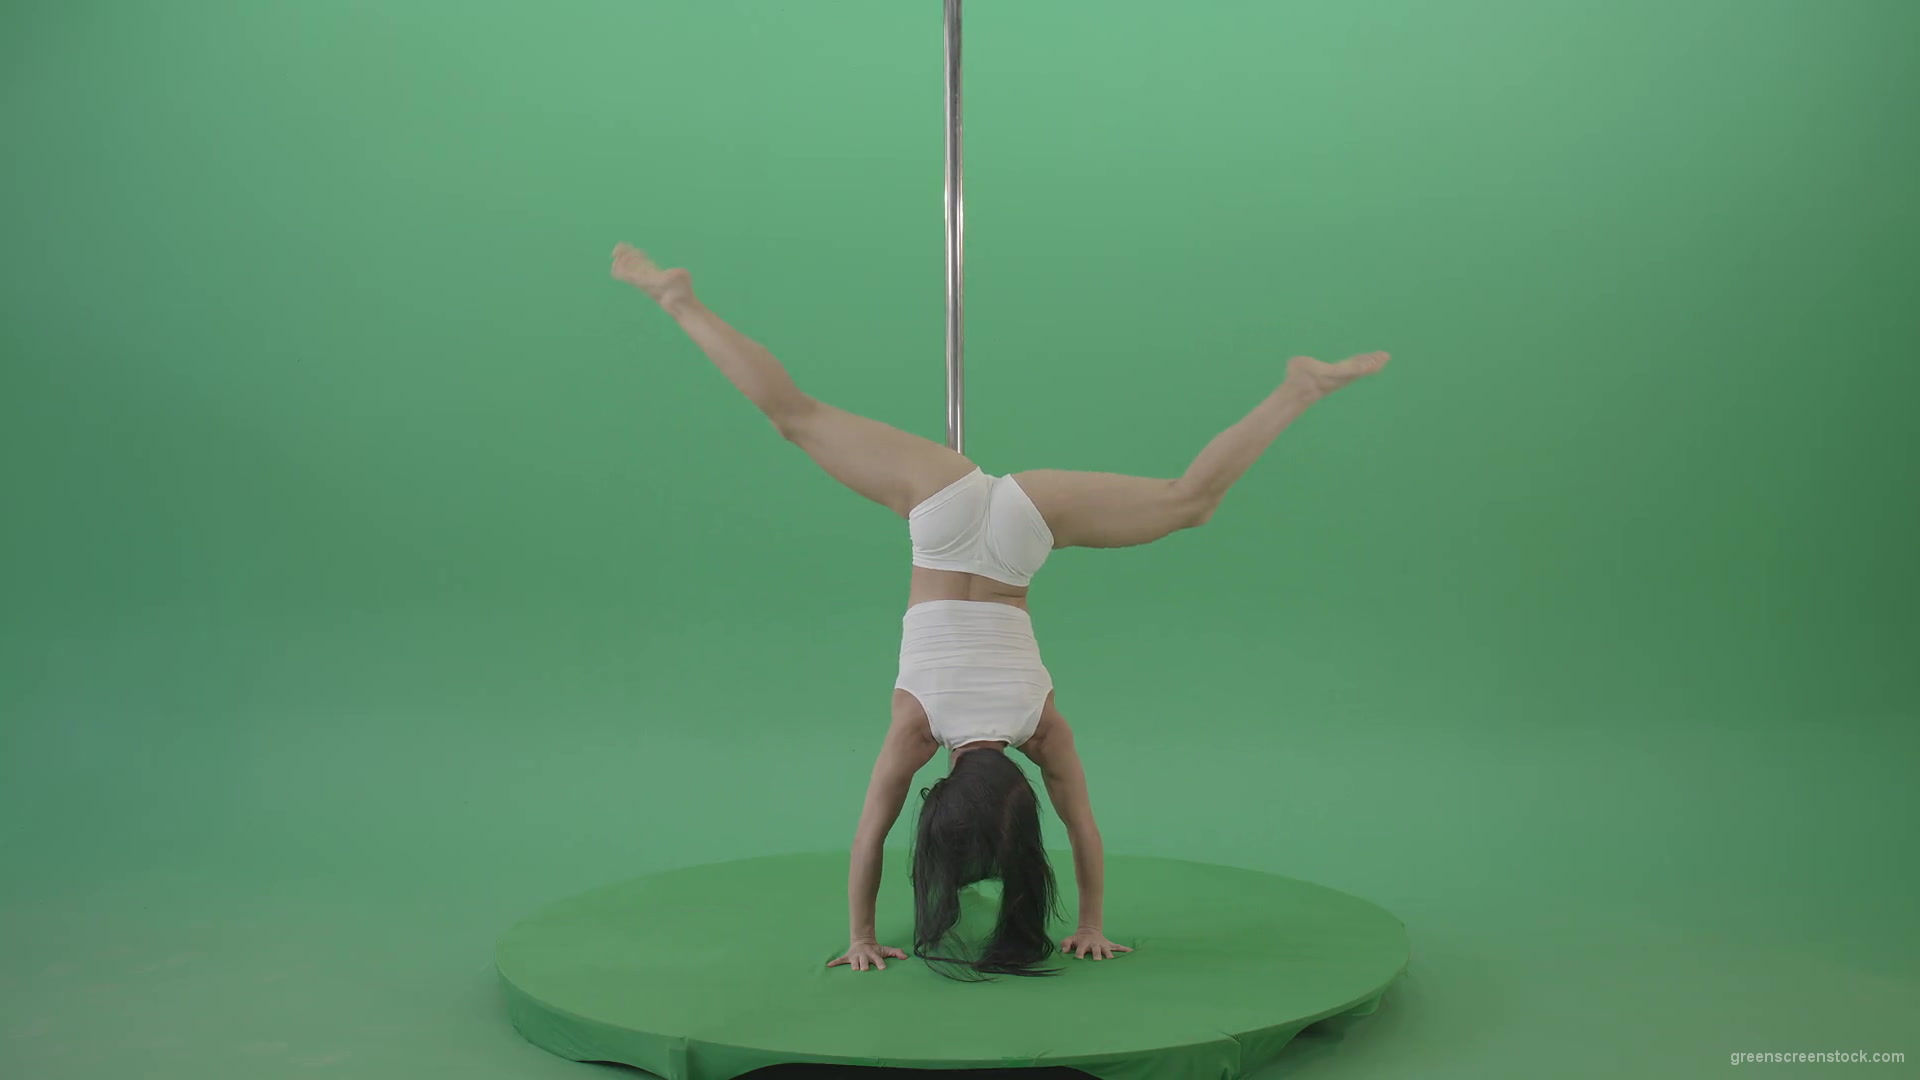 Pole-Dance-Girl-waving-two-legs-isolated-on-green-screen-4K-Video-Footage-1920_005 Green Screen Stock